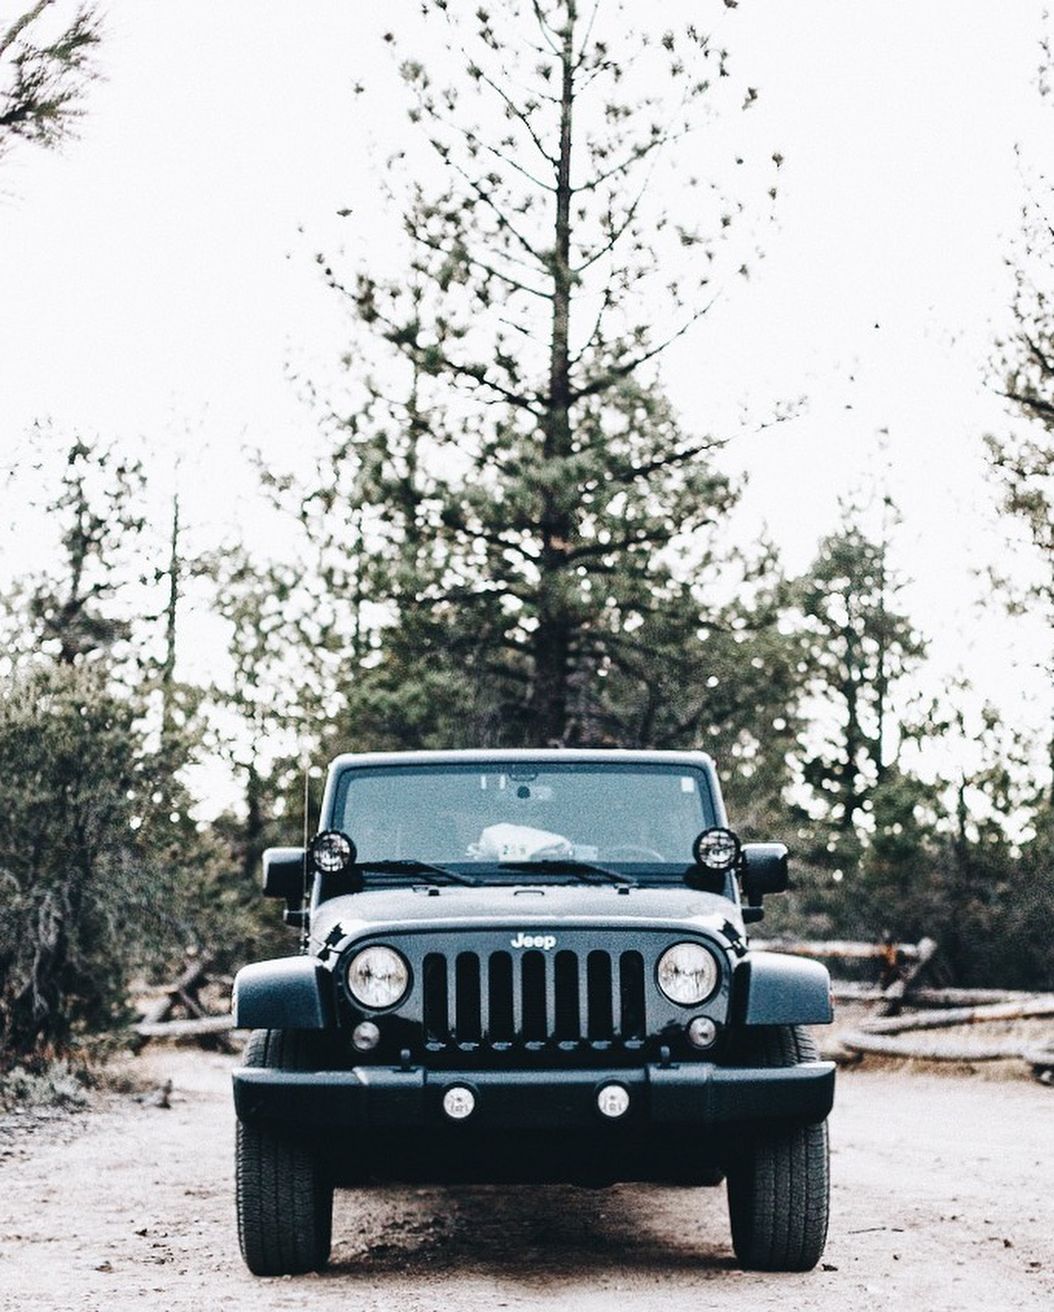 Jeep Wrangler Aesthetic Wallpapers - Wallpaper Cave